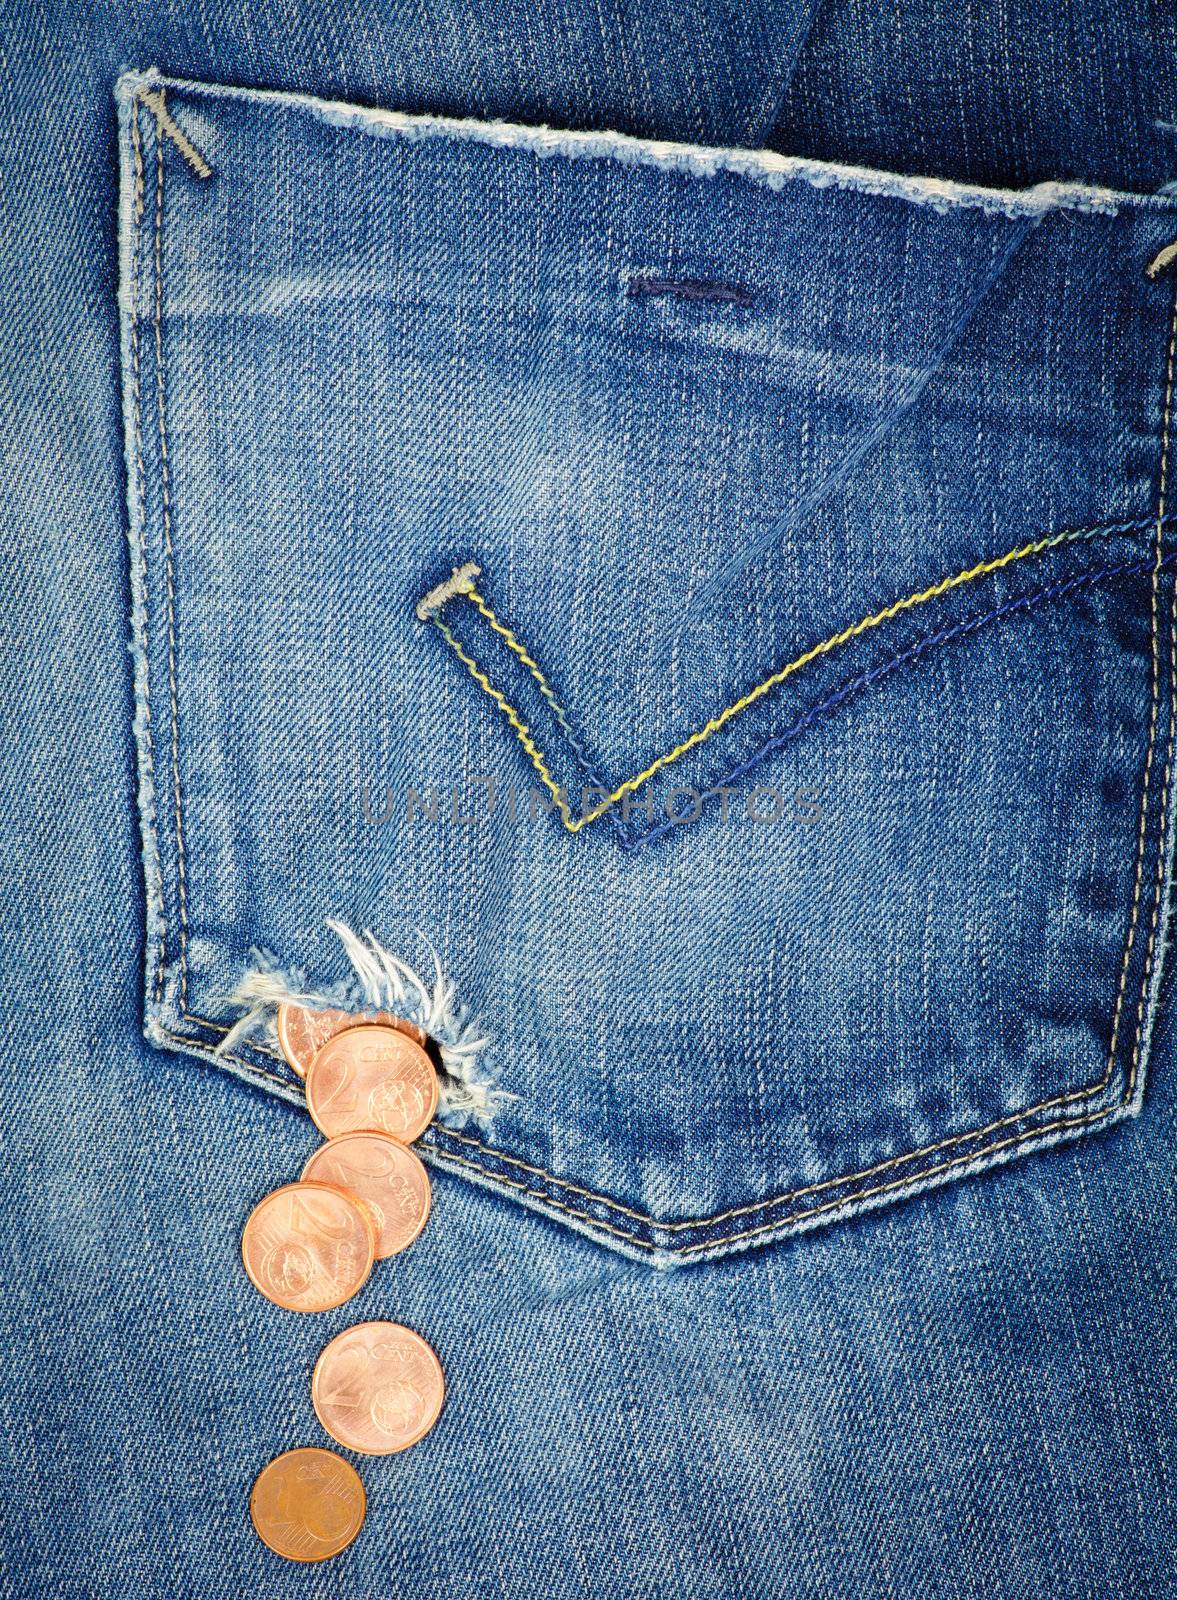 Money fall out from a hole in jeans pocket